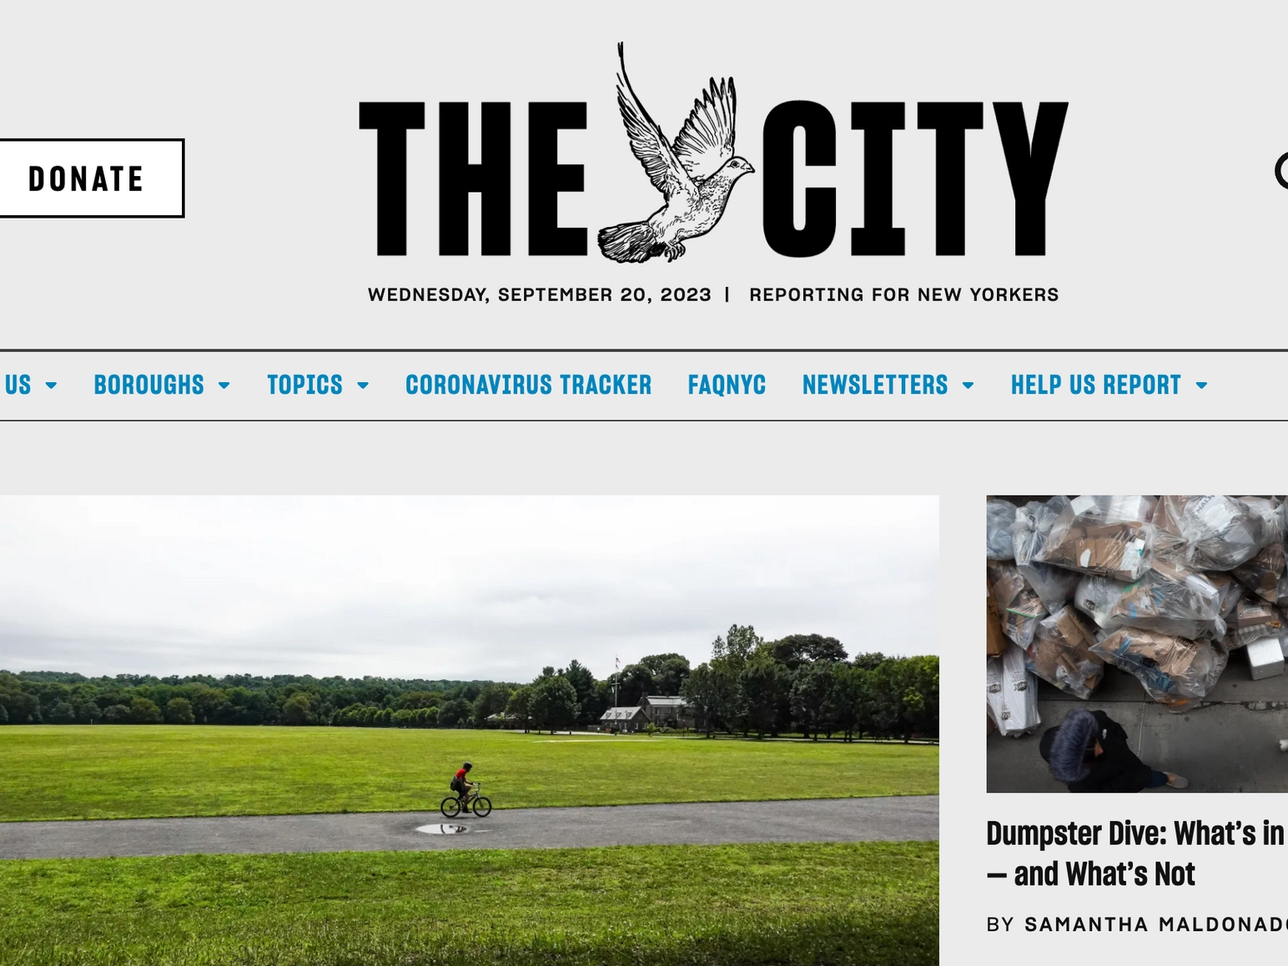 A screenshot of The City's homepage.